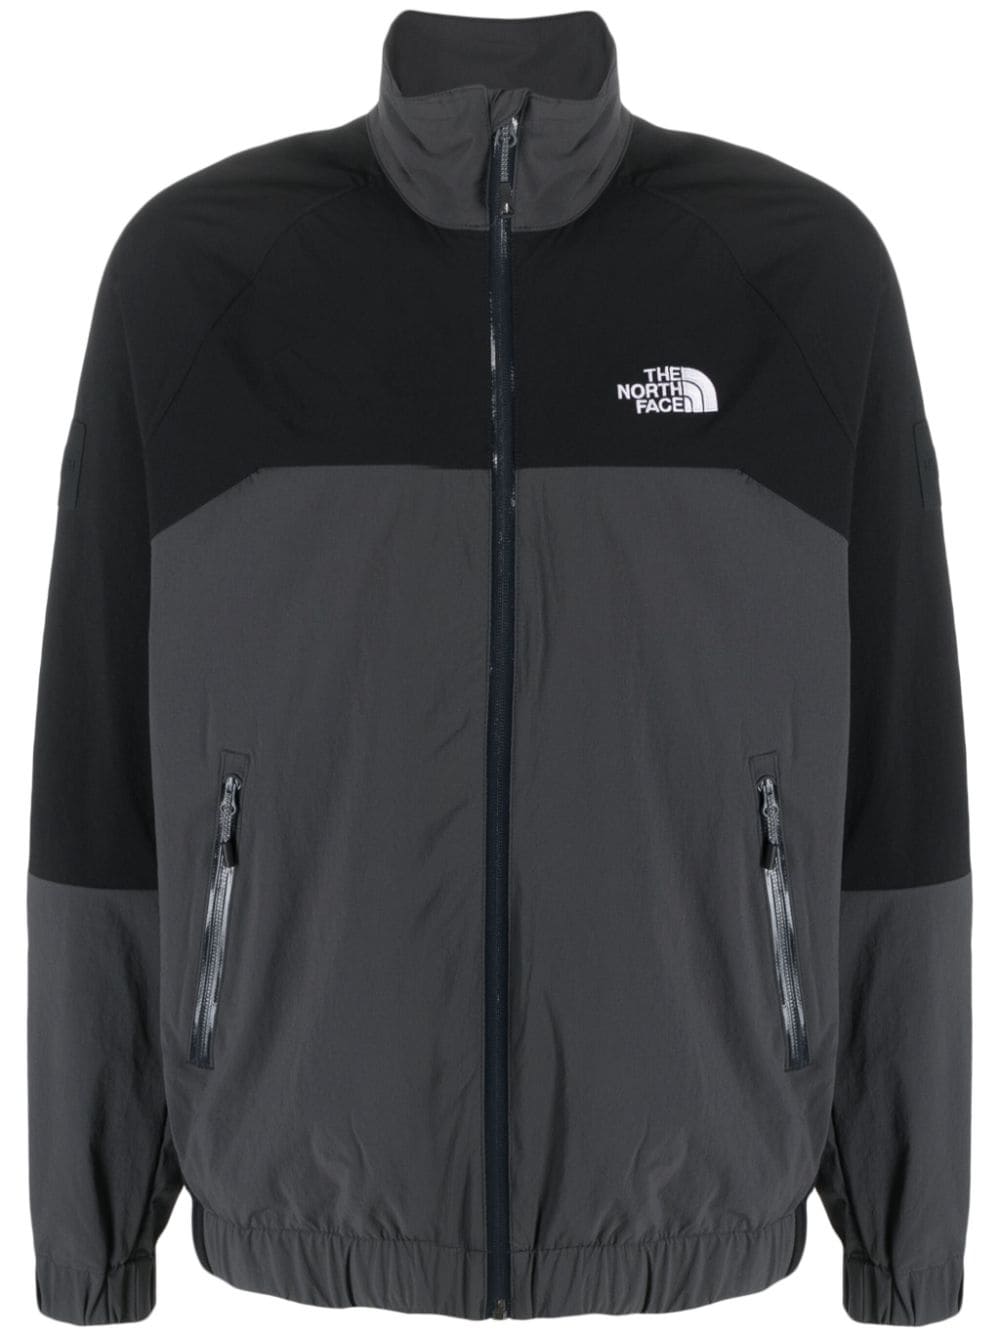 THE NORTH FACE SHELL SUIT LOGO-PRINT JACKET